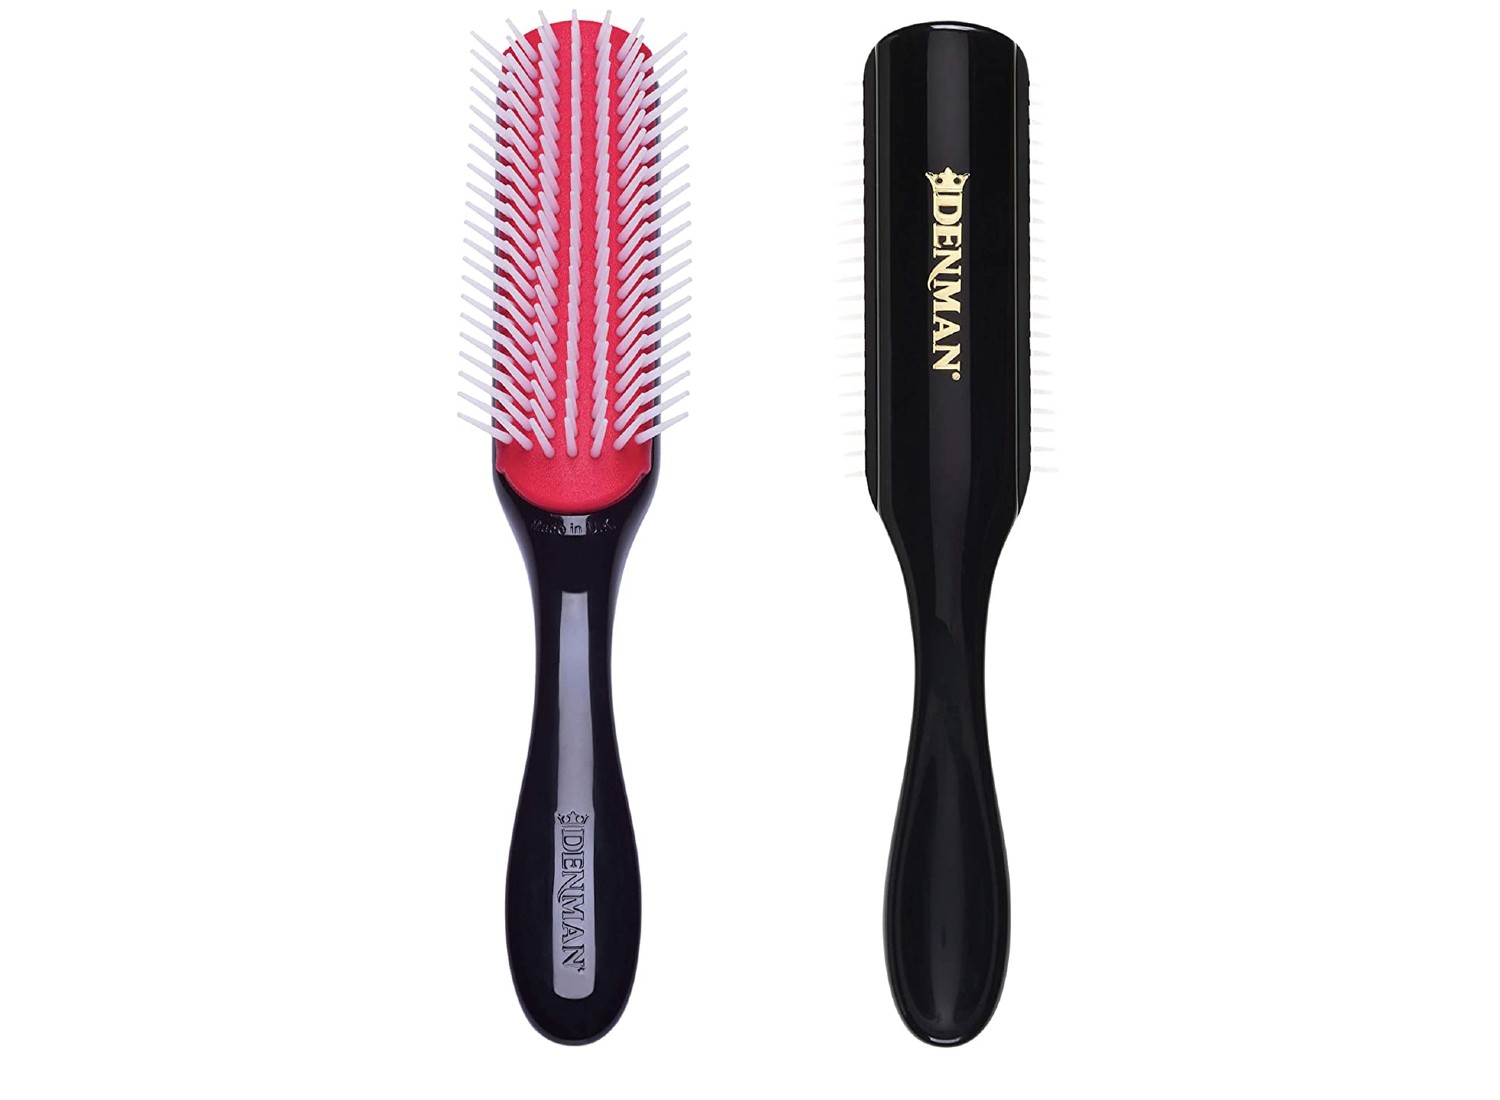 A red and black hairbrush.